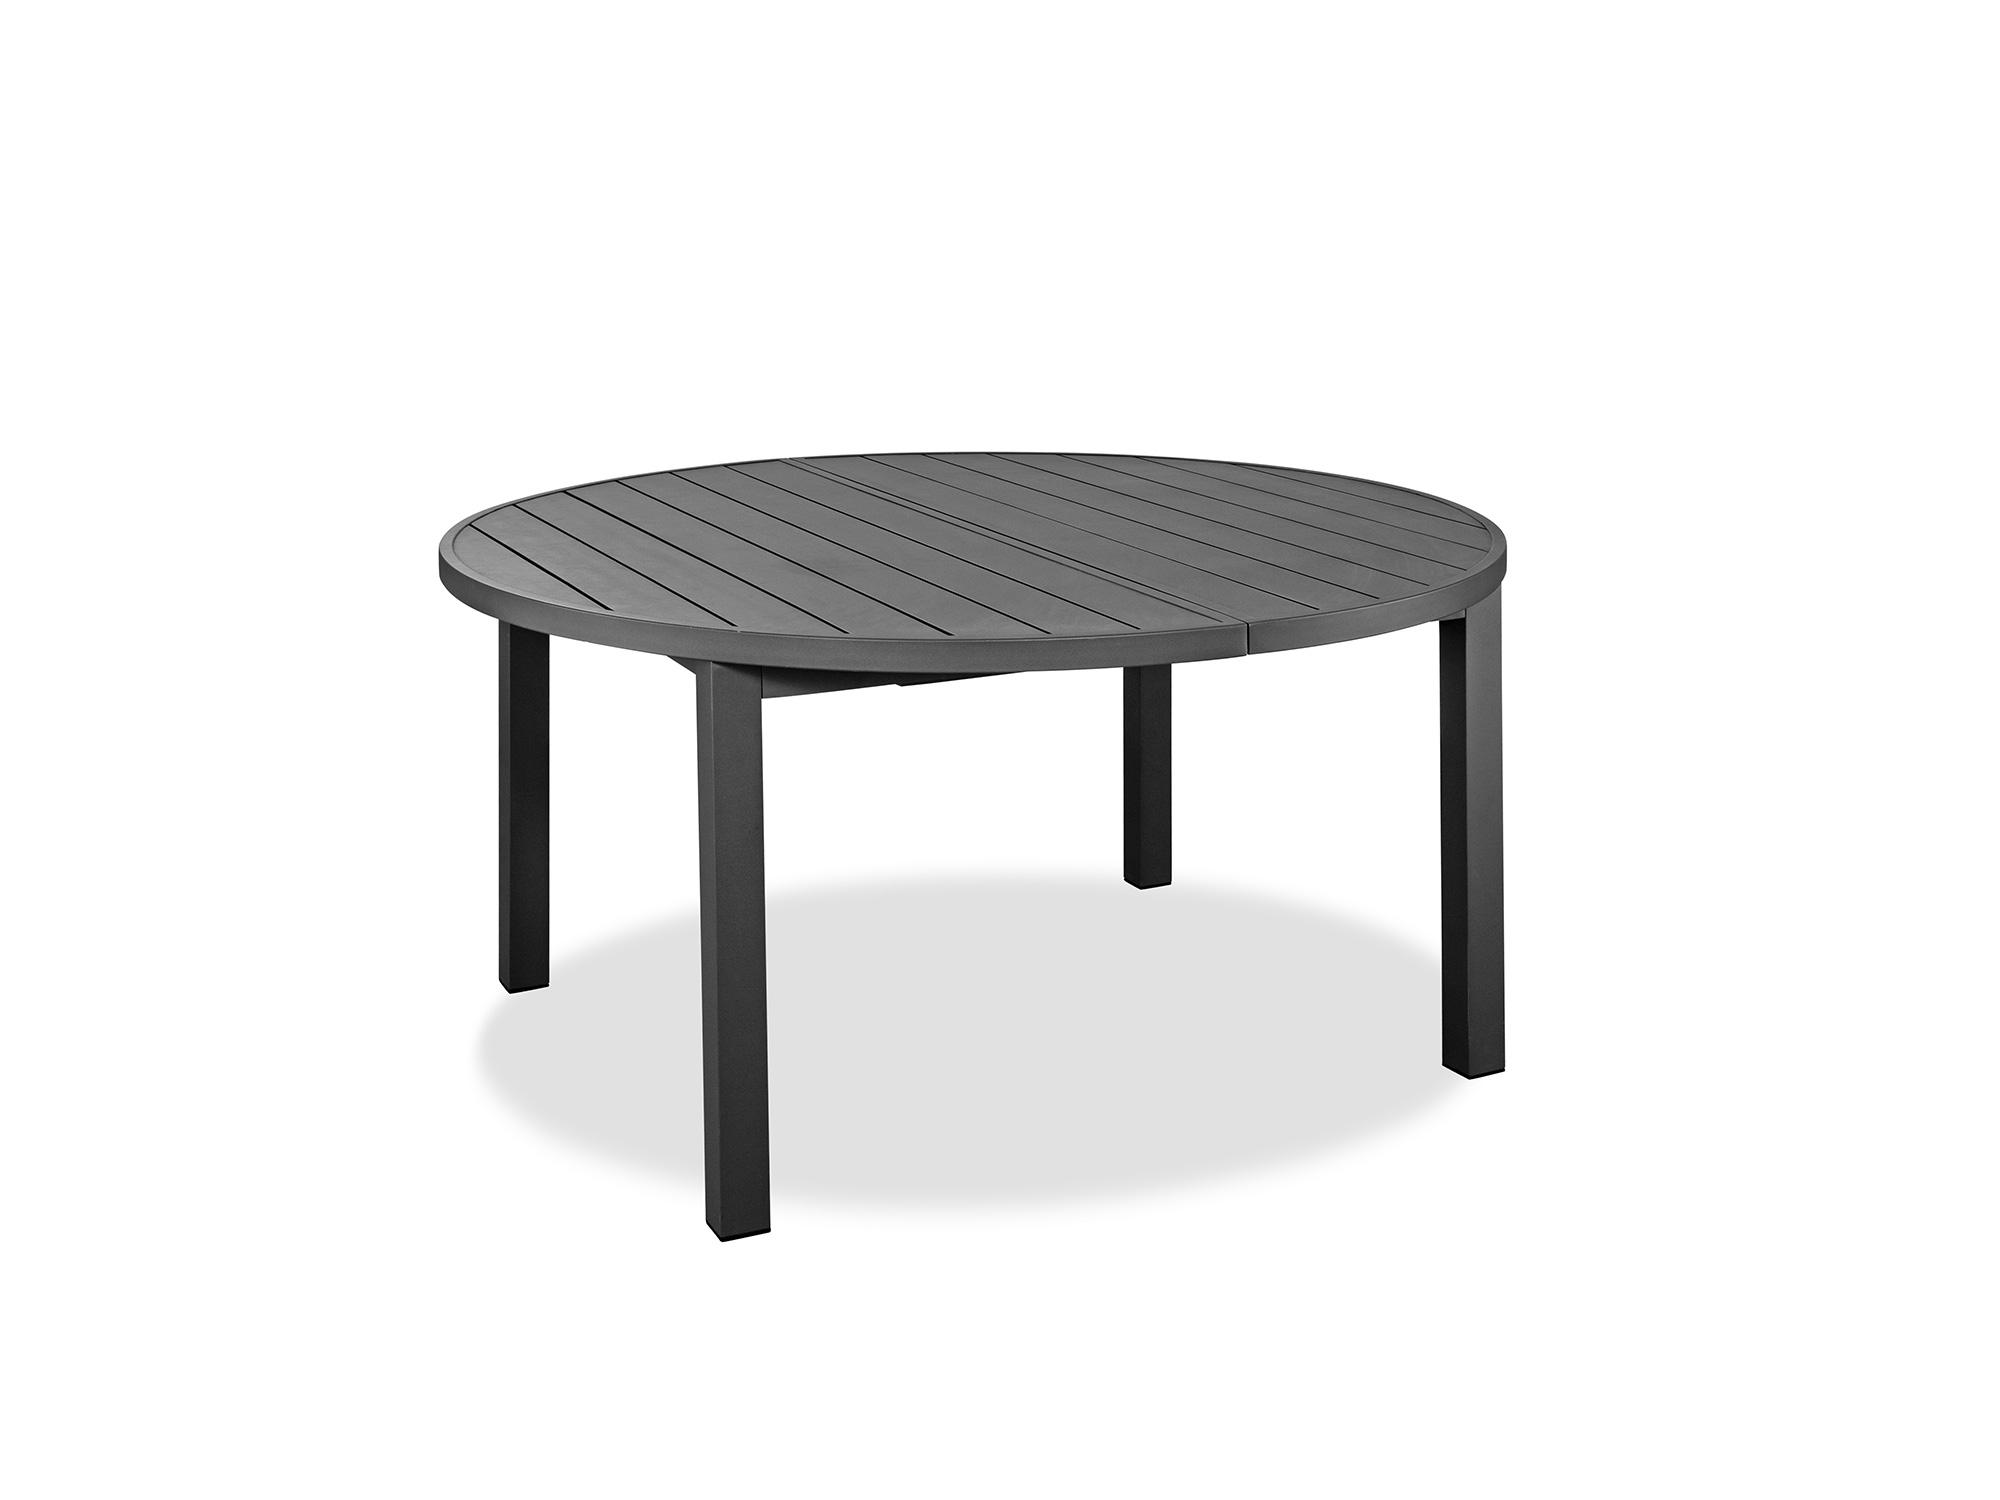 Modern Outdoor Dining Table DT1565-GRY Aloha DT1565-GRY in Gray 